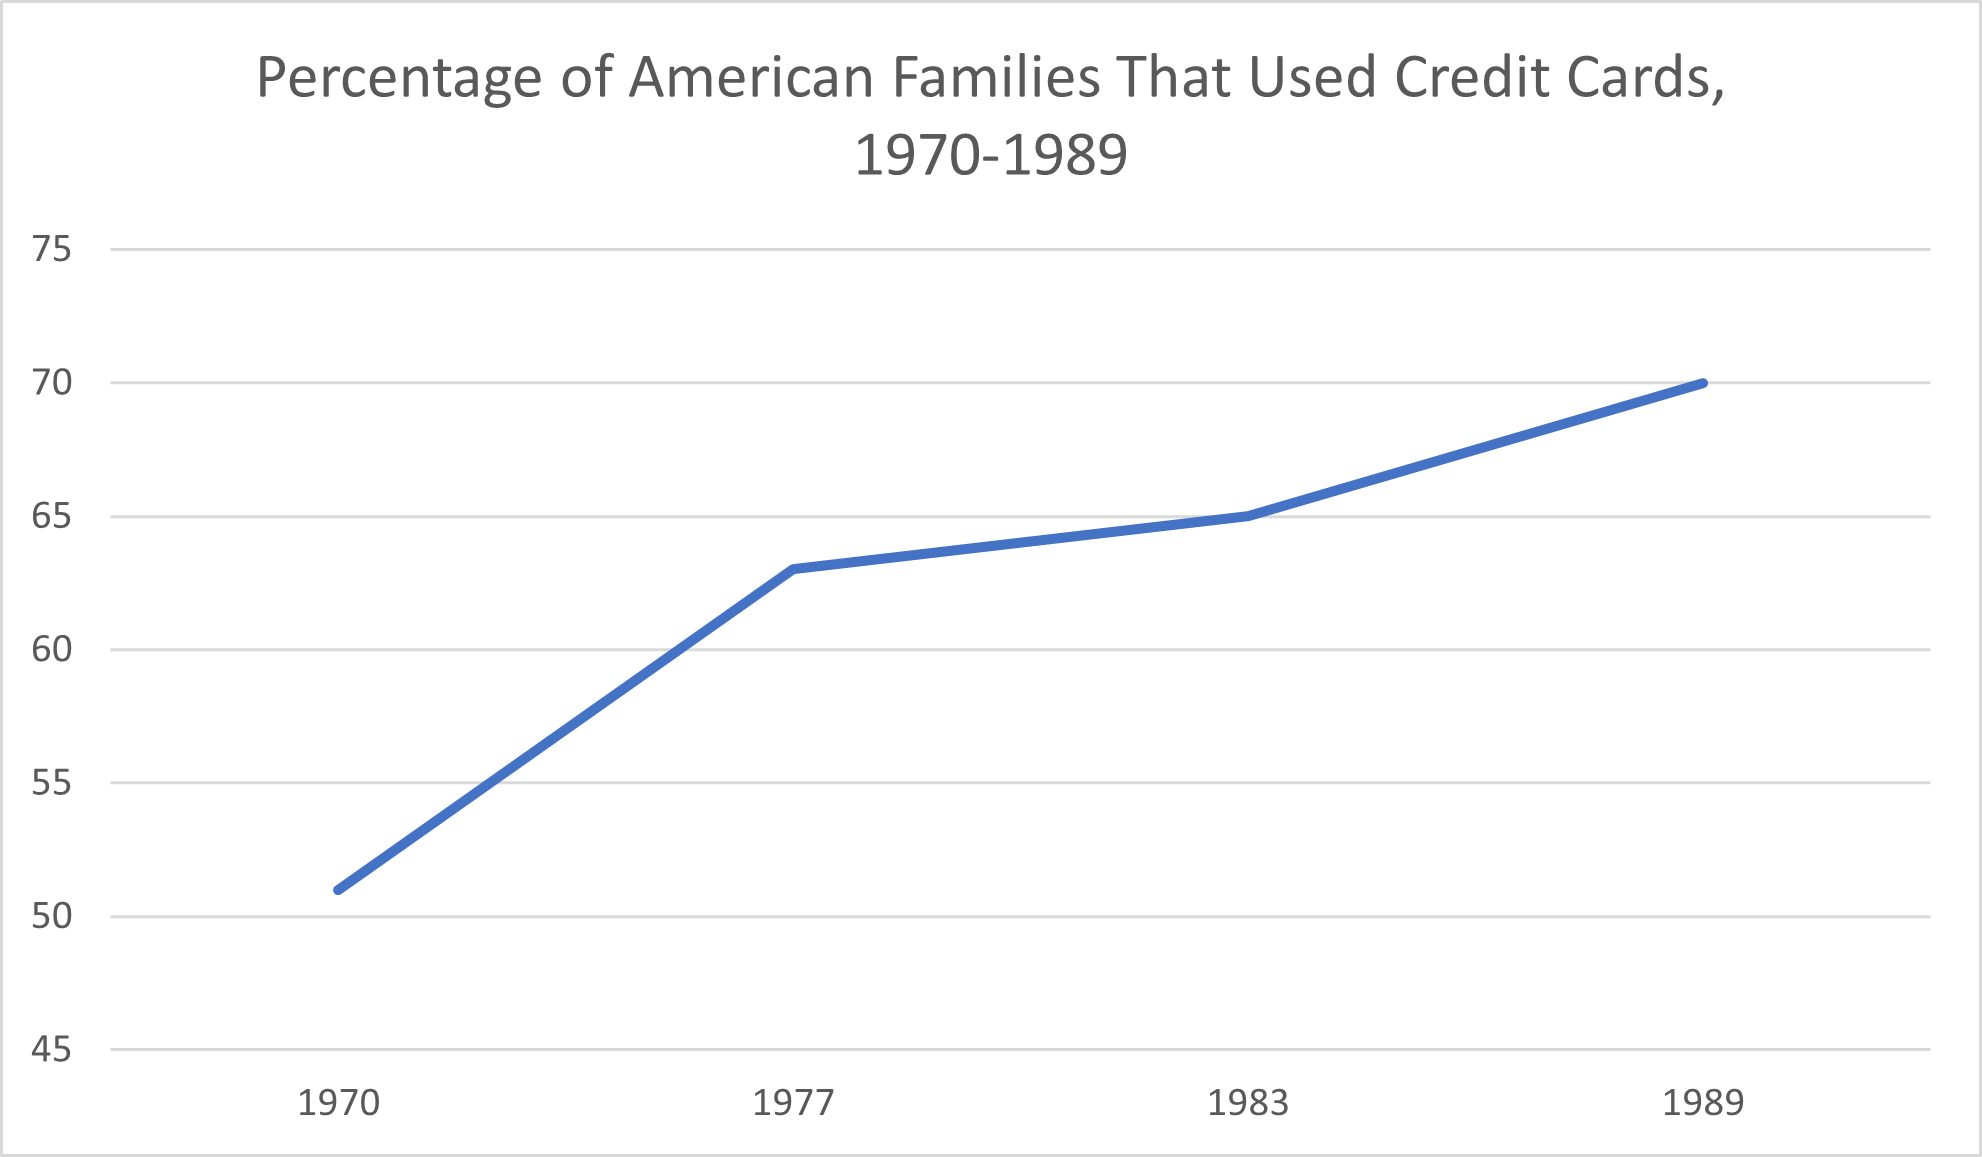 Percentage of American Families That Used Credit Cards, 1970-1989